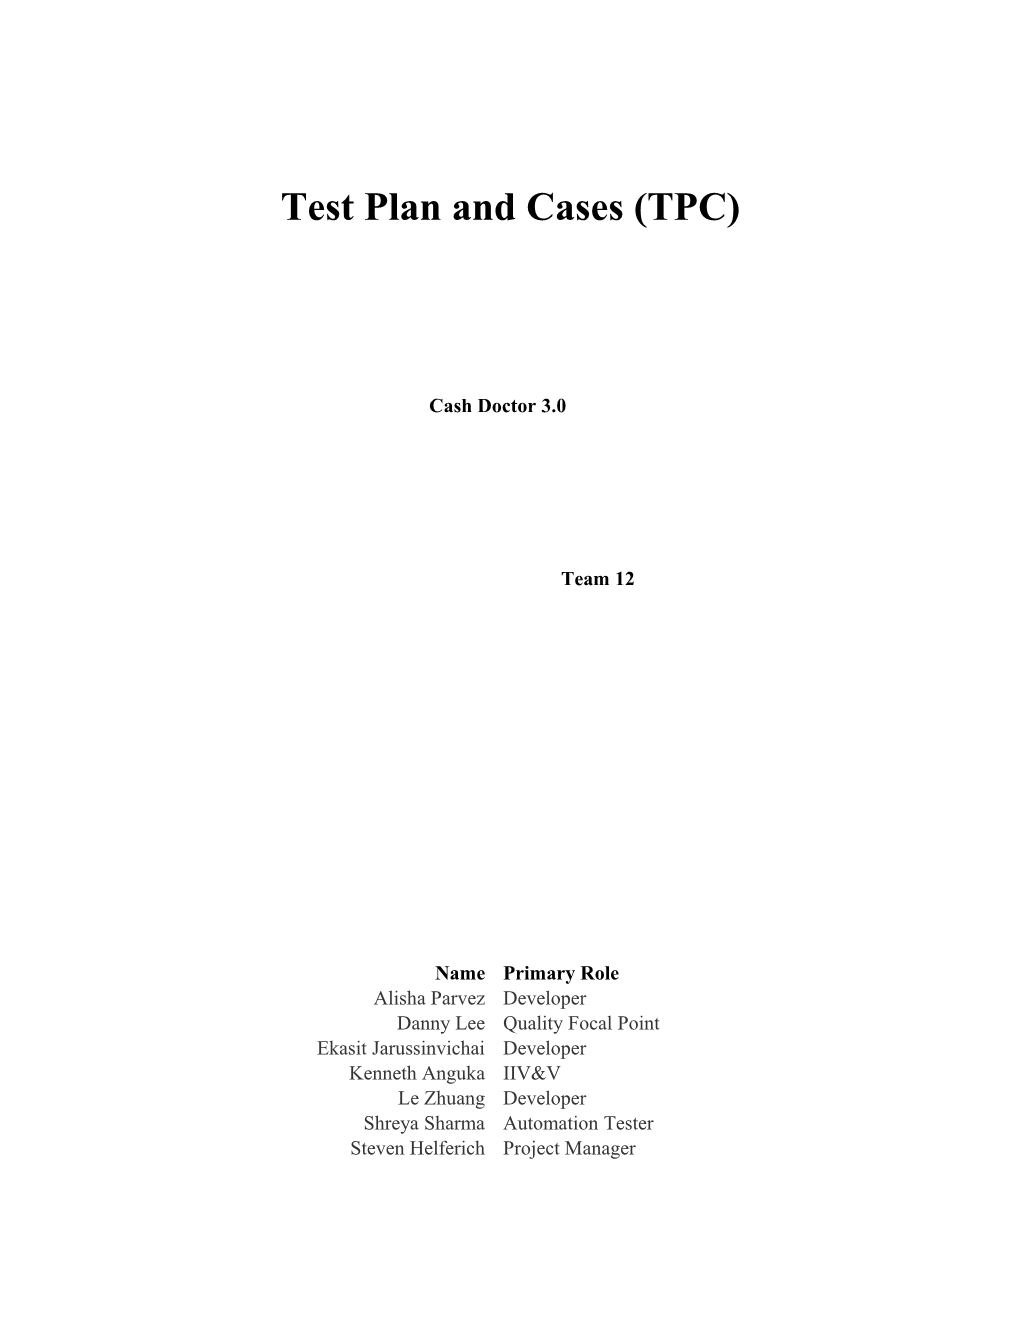 Test Plan and Cases (TPC) s3